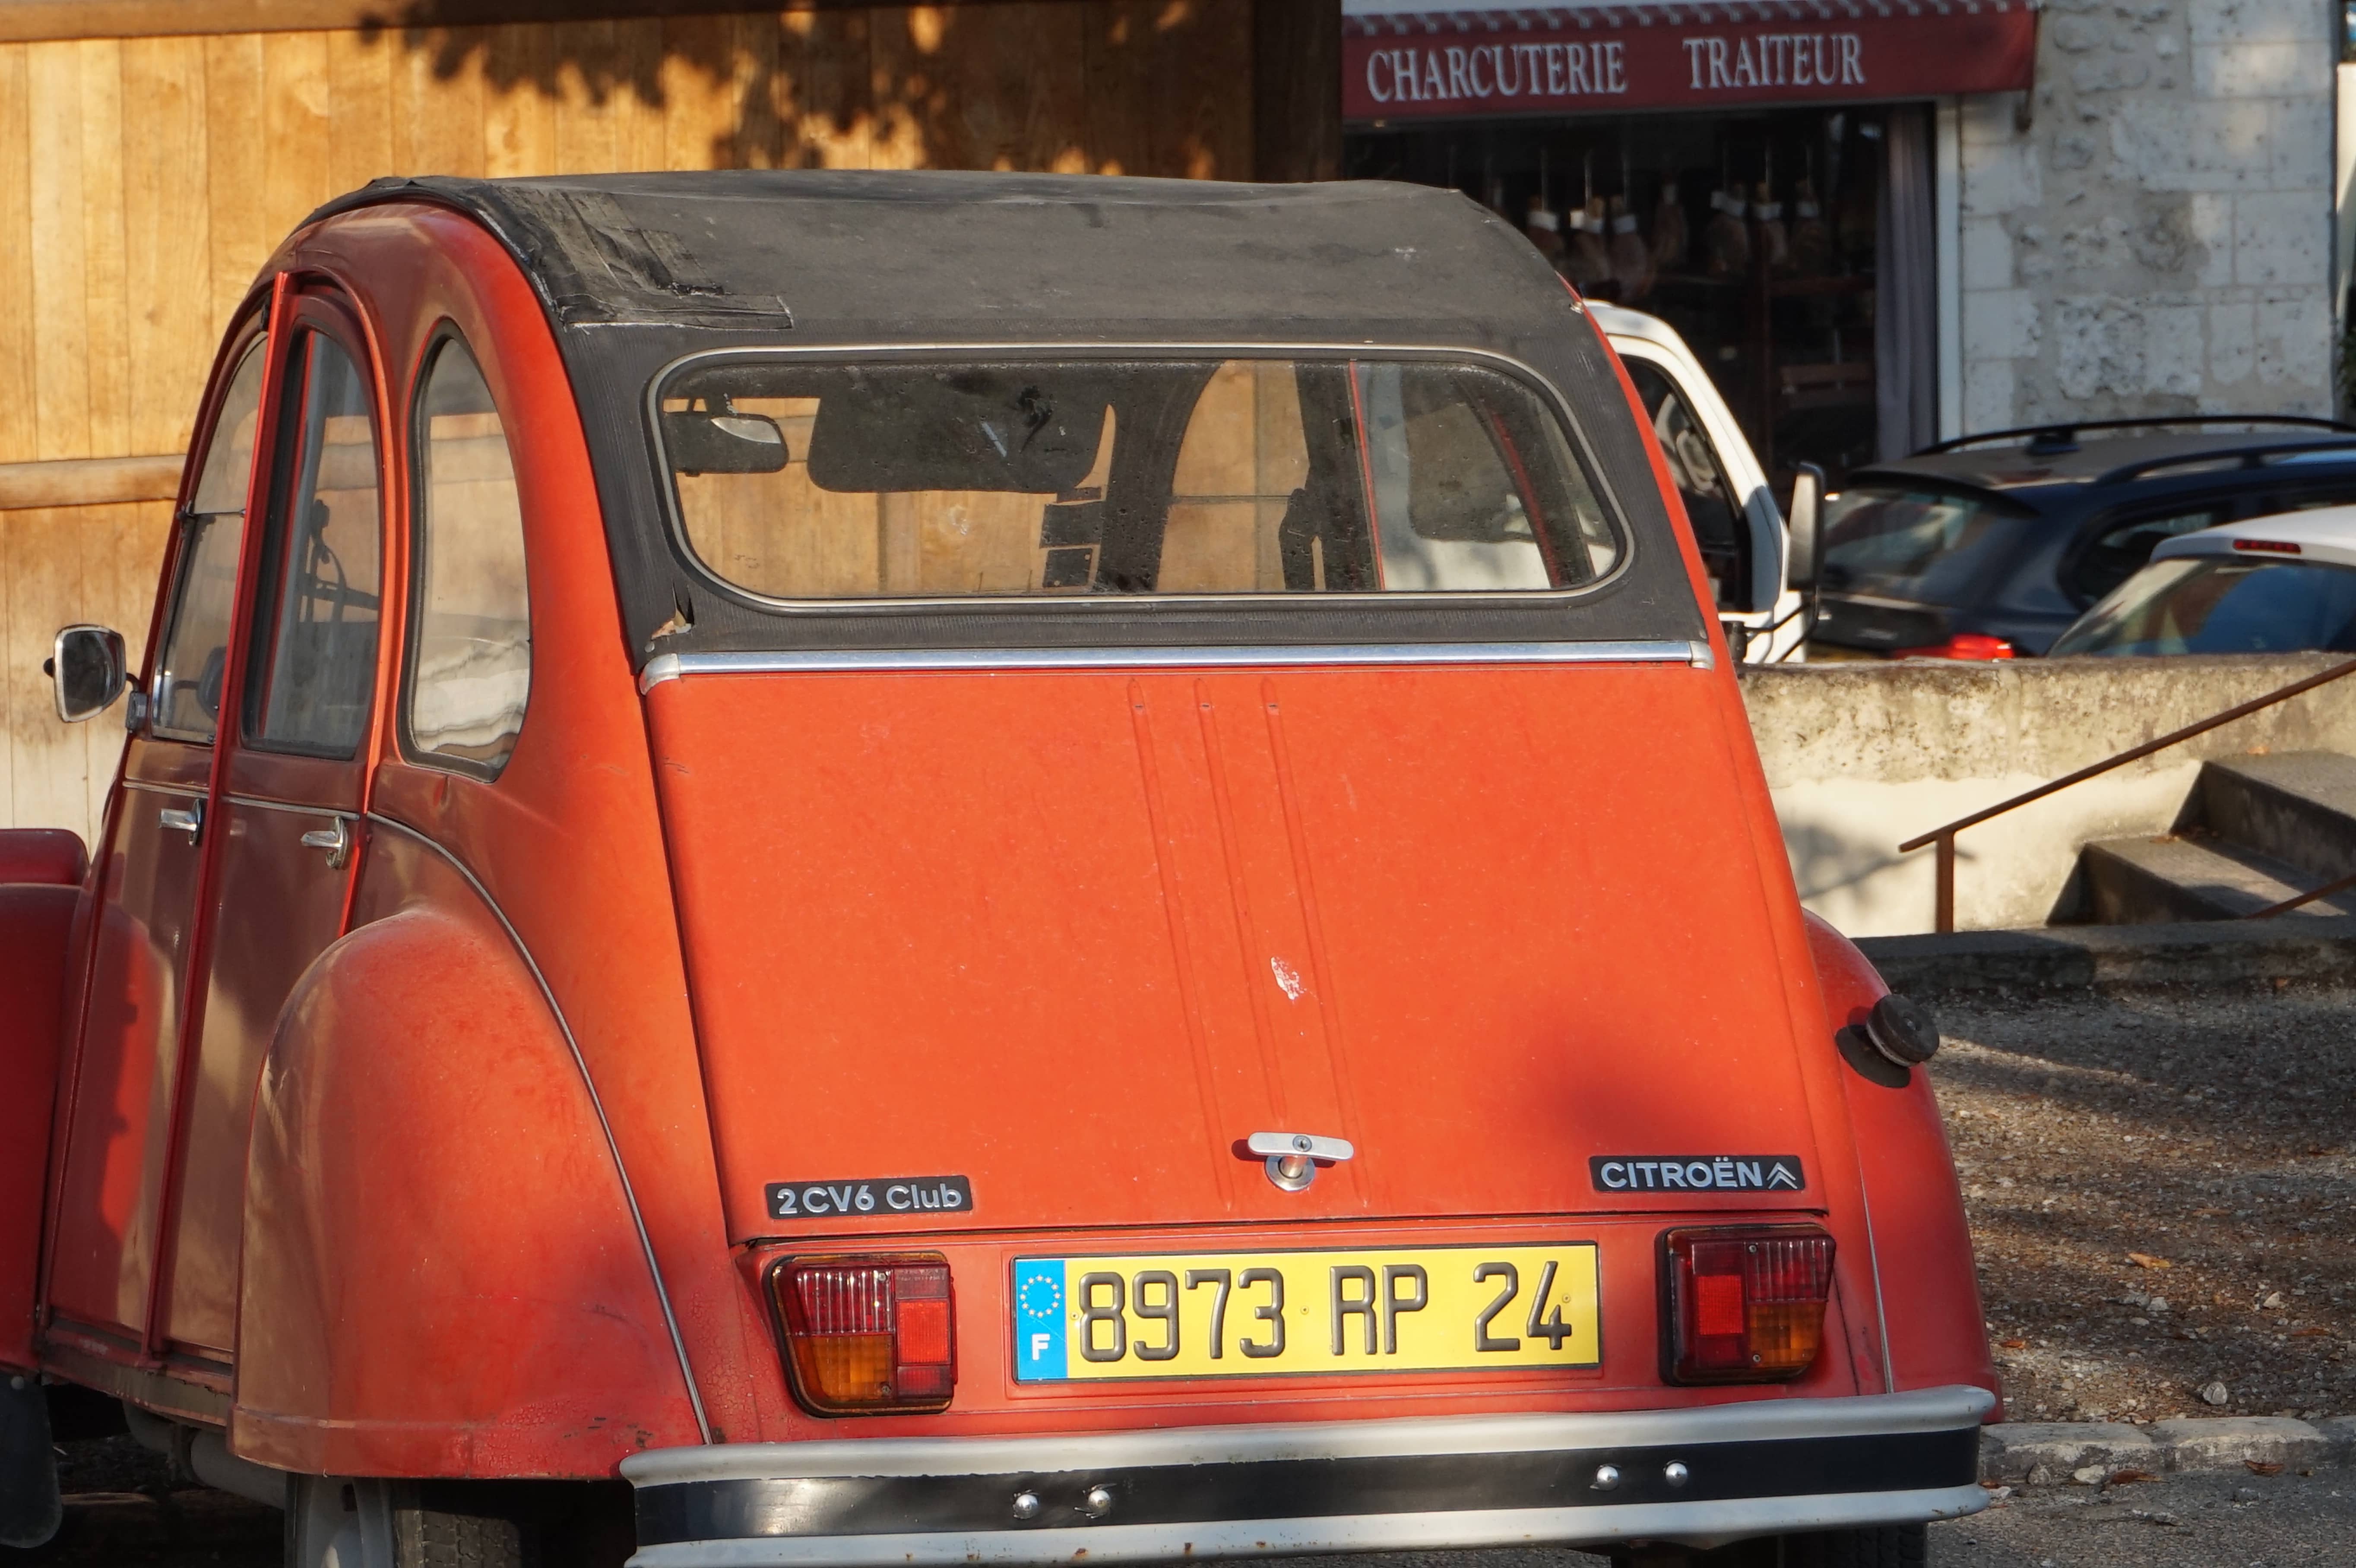 You can't have an article about roads in France without a pictures of a 2CV